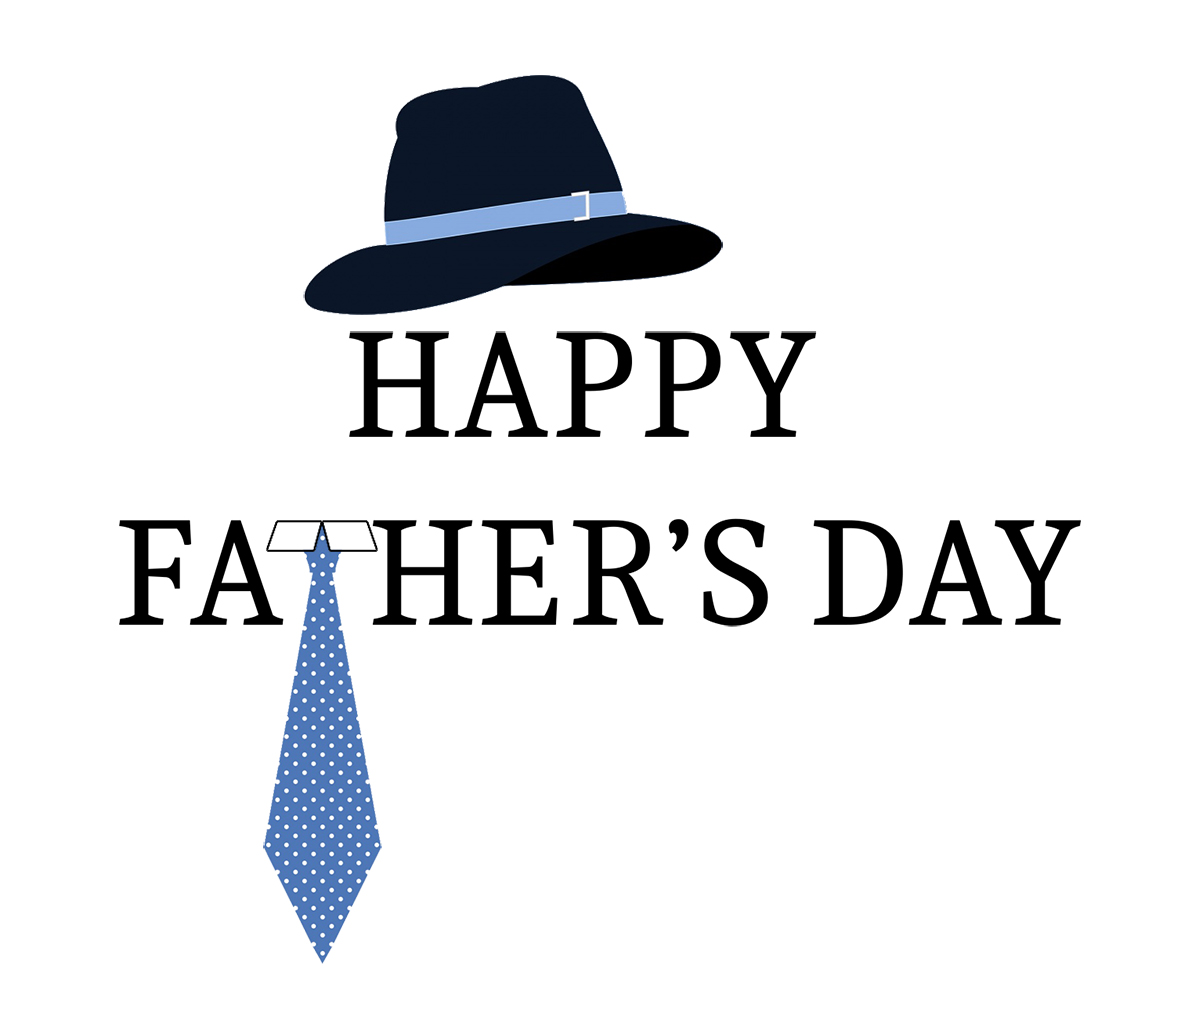 Happy father's day hat and tie